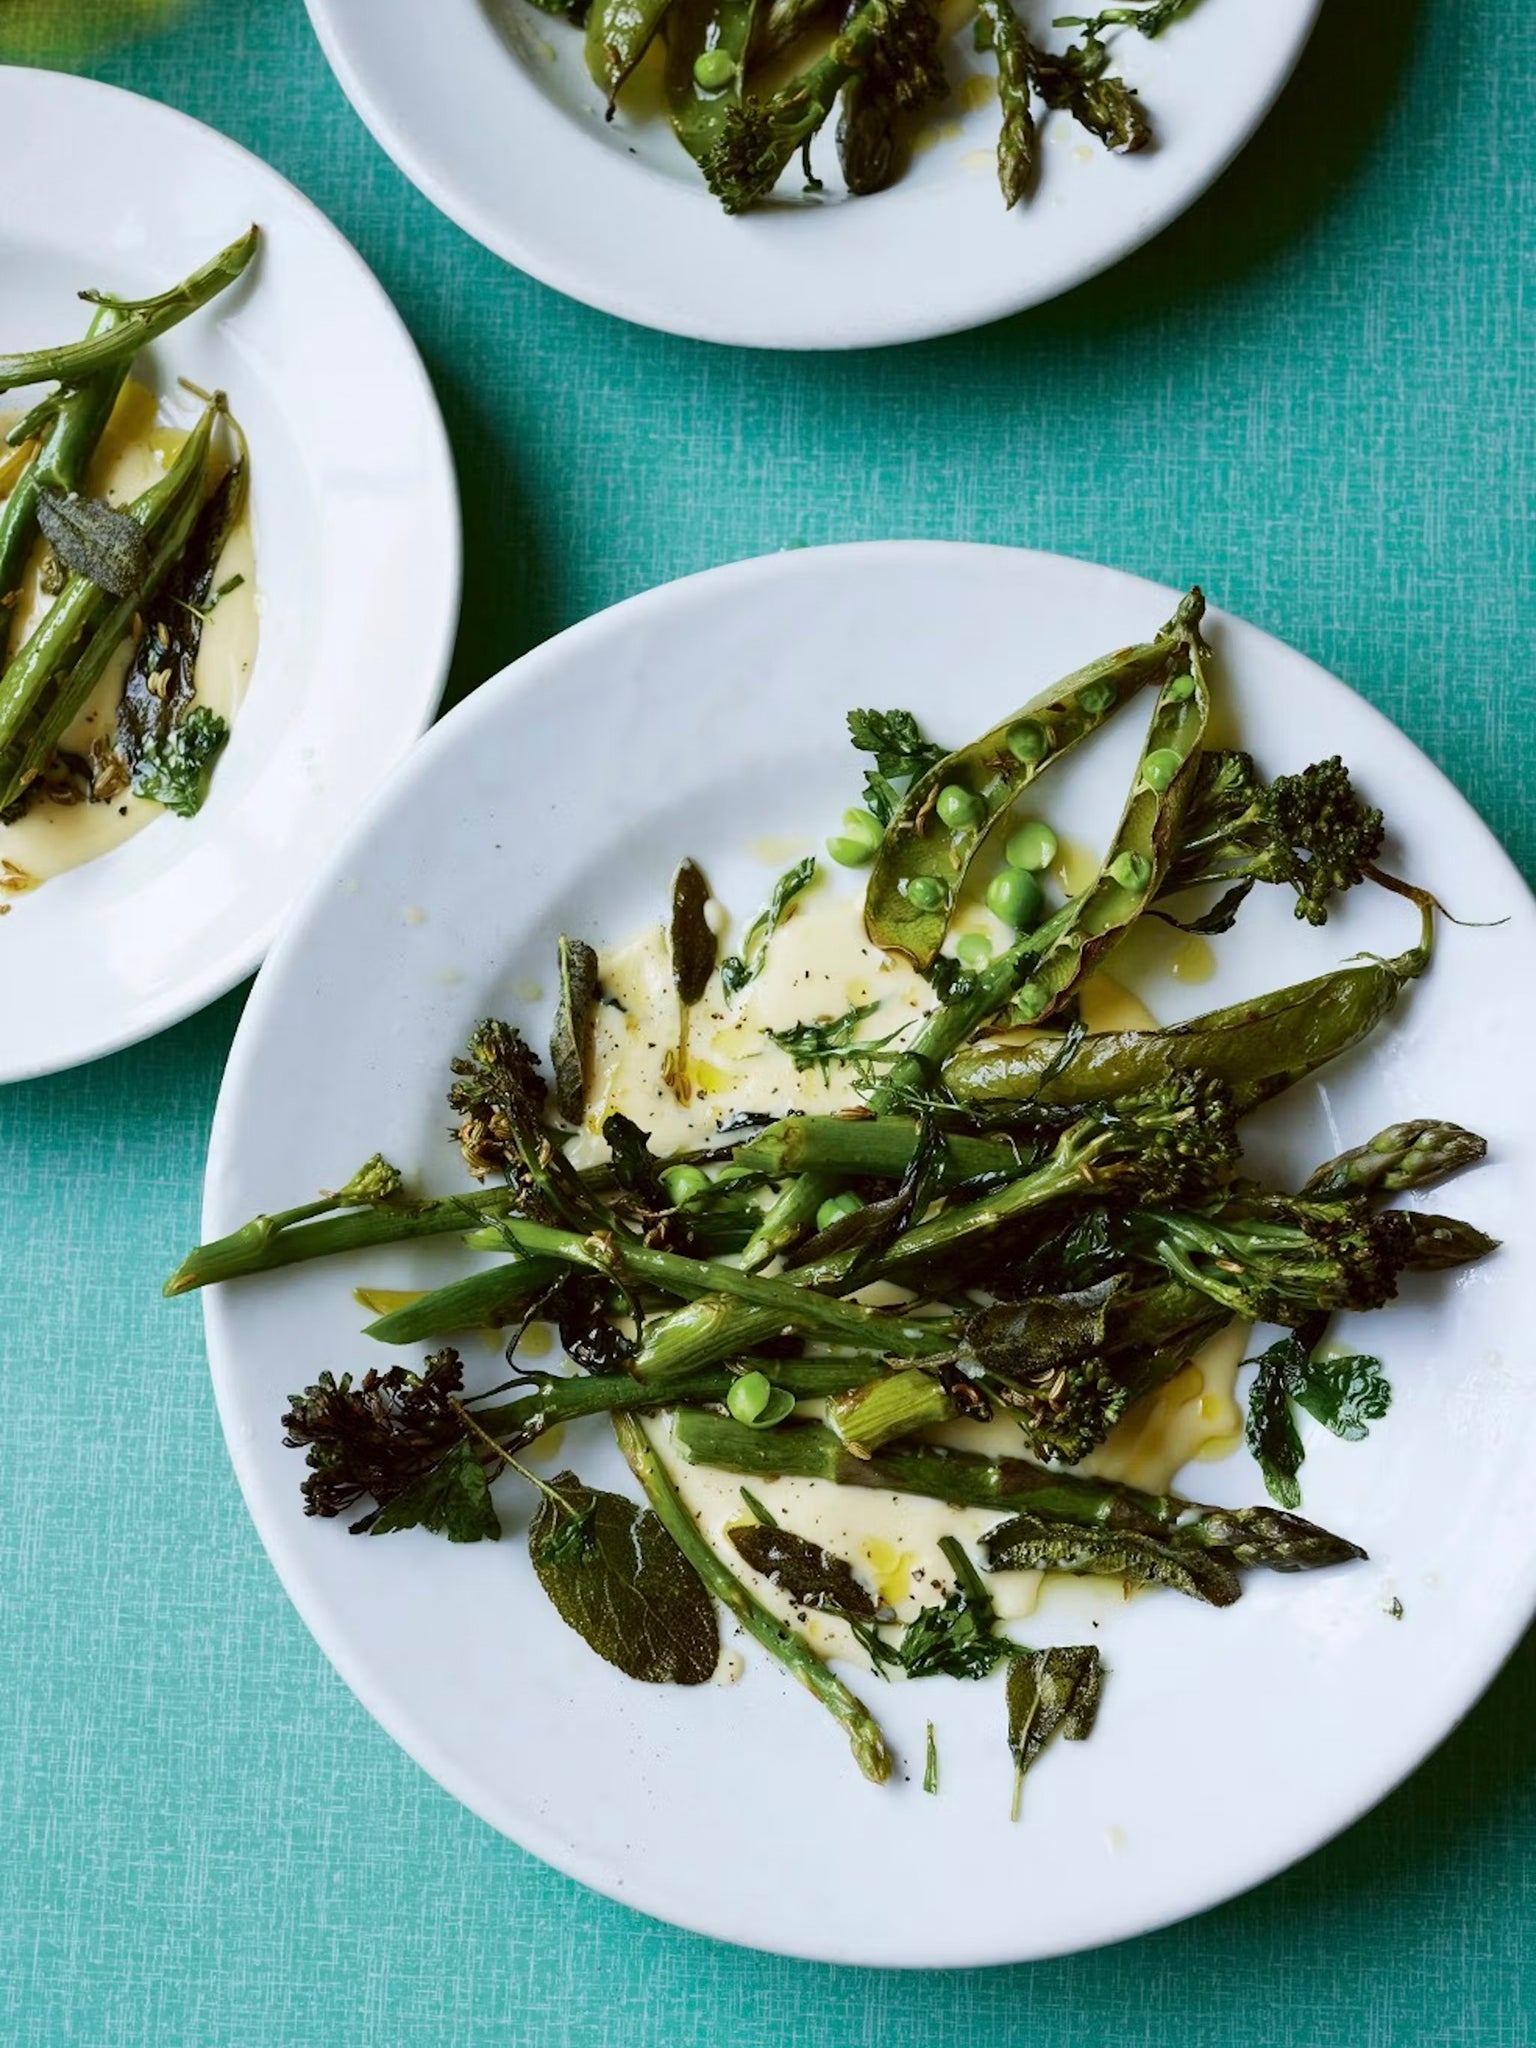 Roast spring vegetables with mustard cheese sauce, a recipe from the new book